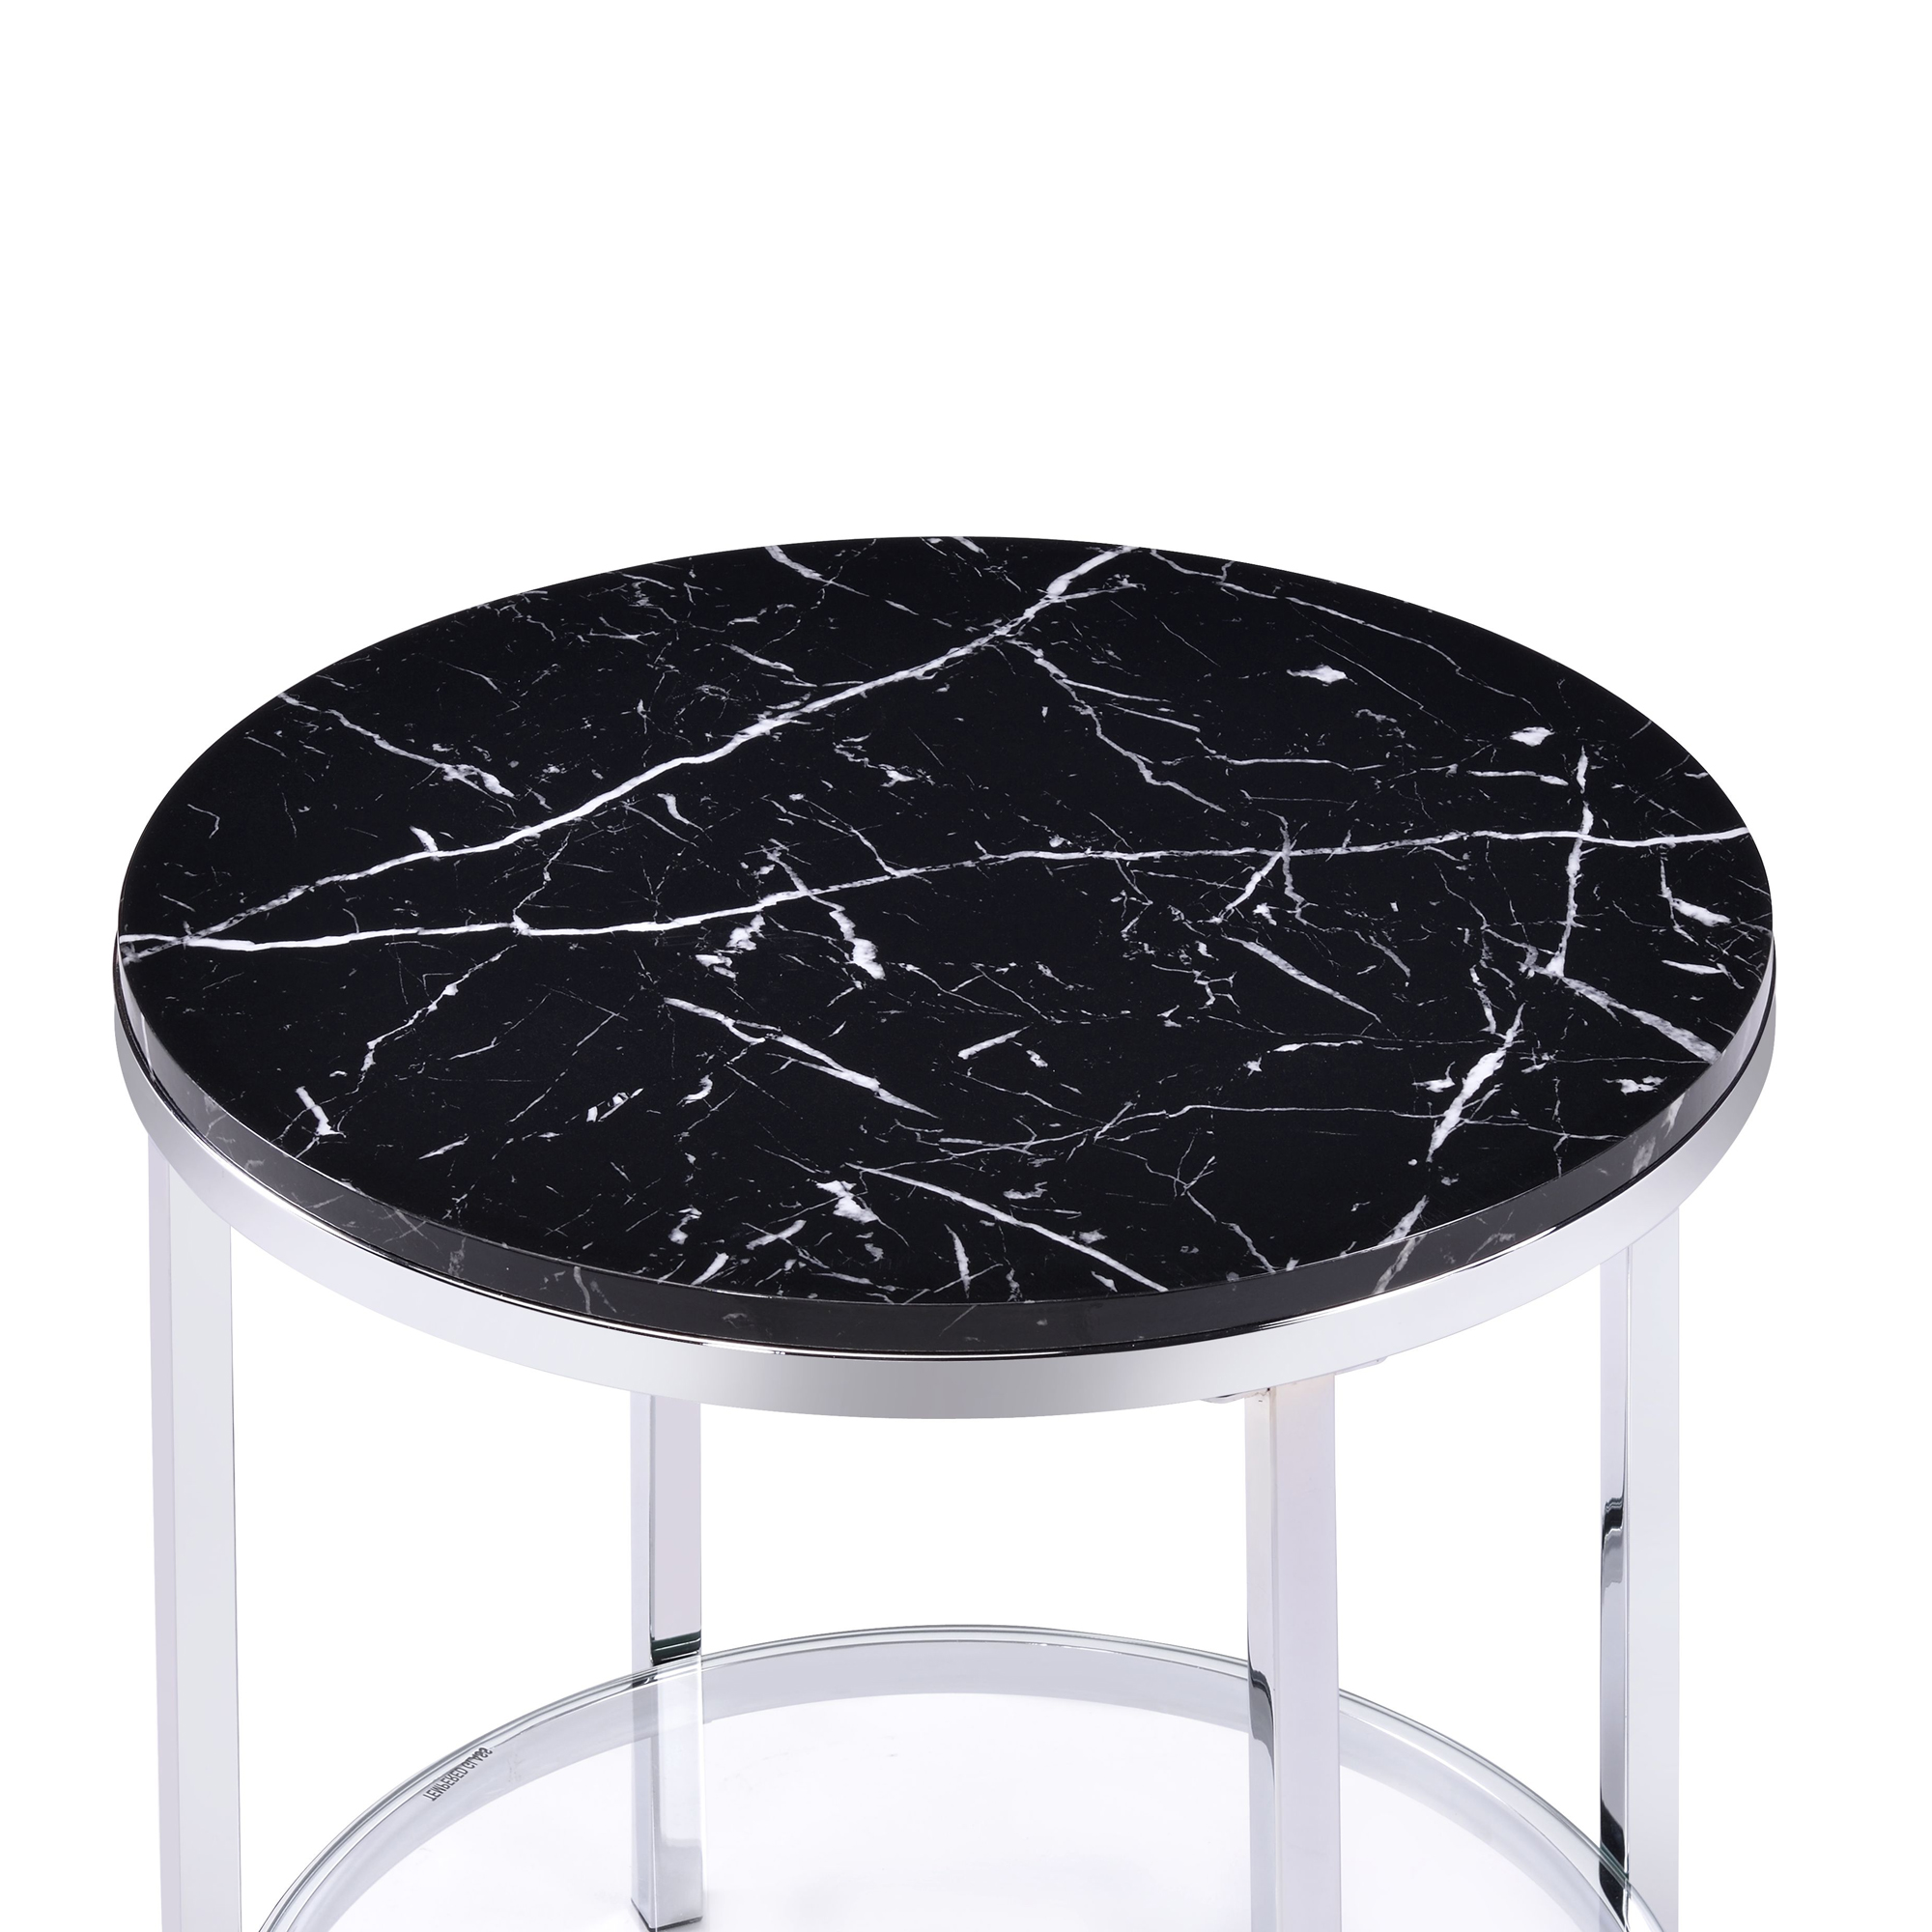 ACME Virlana Round End Table in Black and Chrome - image 3 of 5